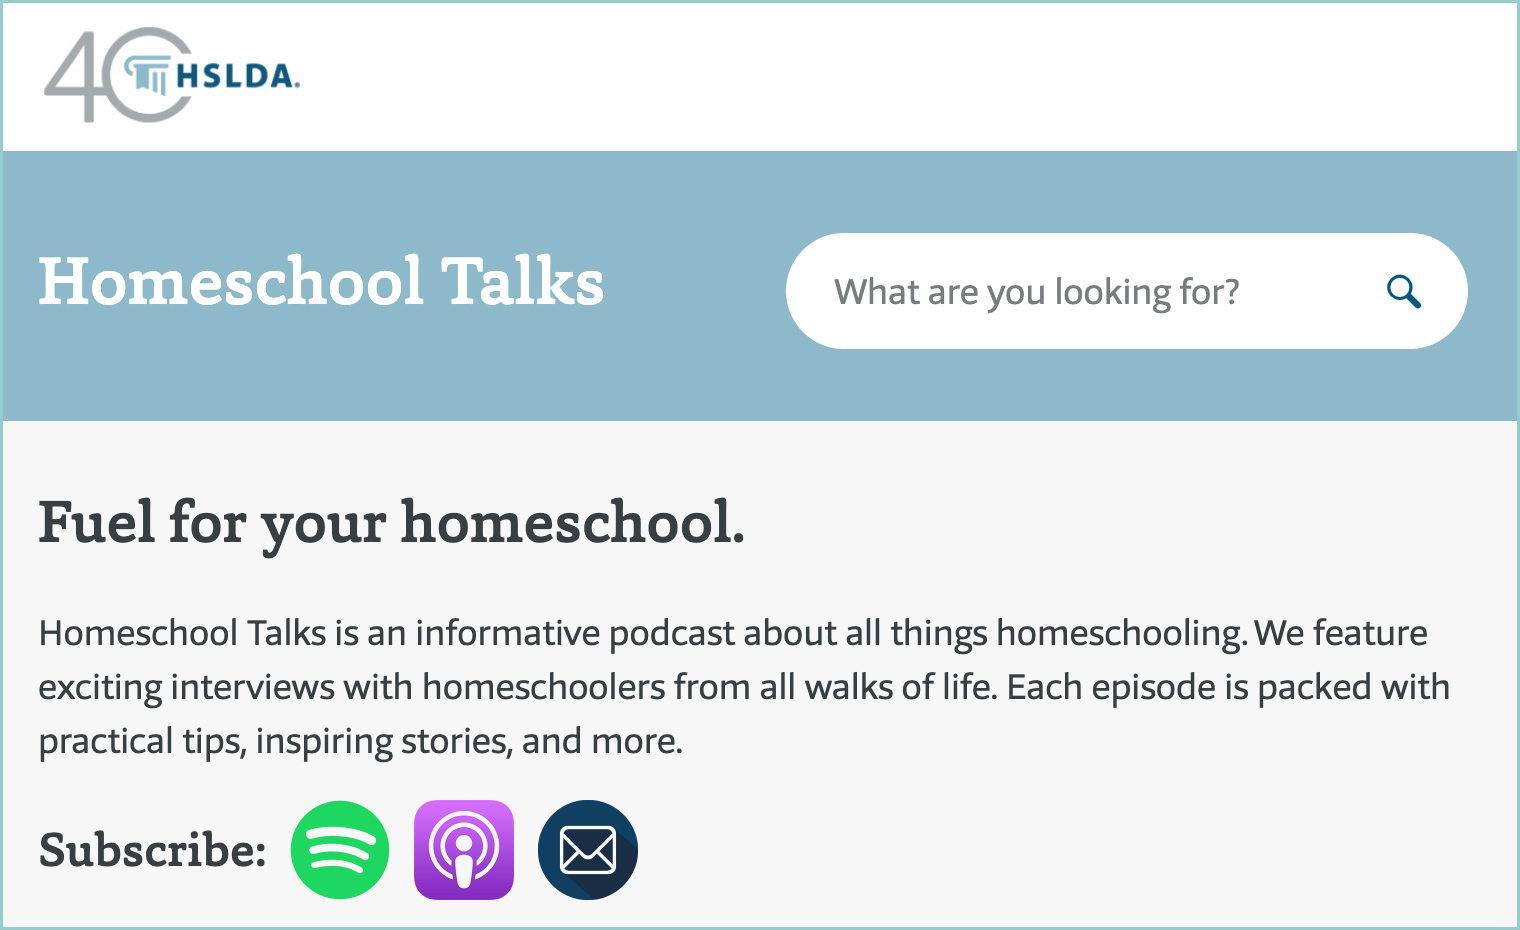 Homeschool Talks is an informative podcast about all things homeschooling. 